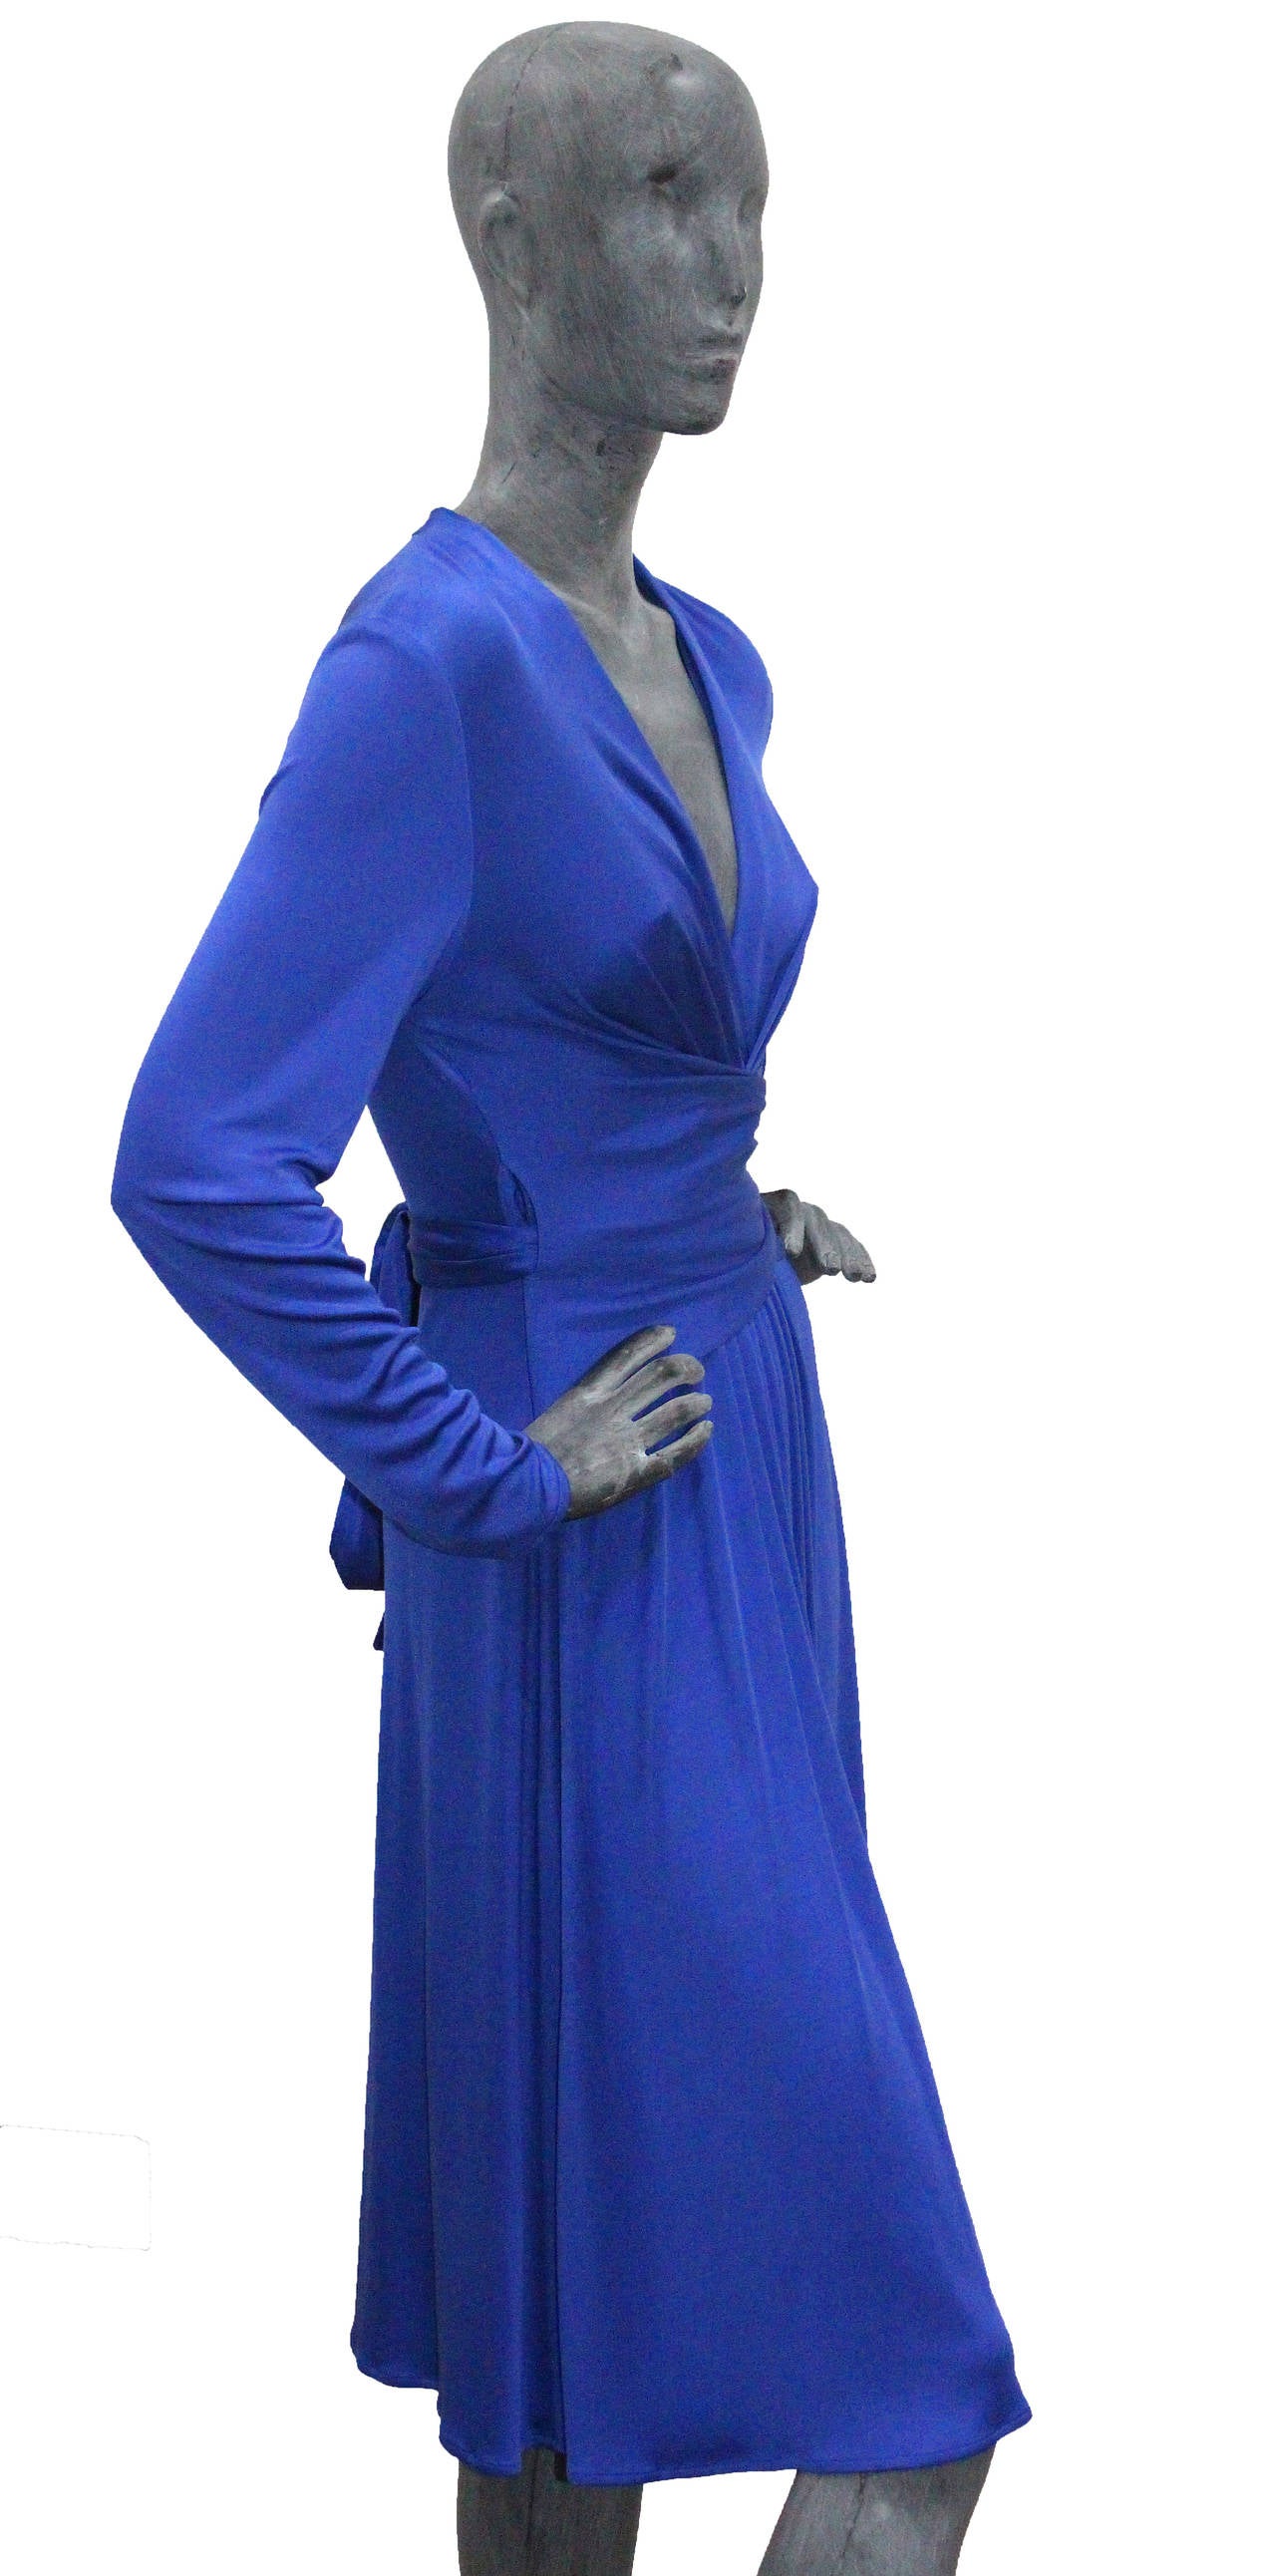 A rare silk jersey wrap dress by Issa London from 2010. Kate Middleton, The Duchess of Cambridge wore an identical dress for the royal engagement on 16 November 2010 to coordinate with the sapphire engagement ring given to her by Prince William. The